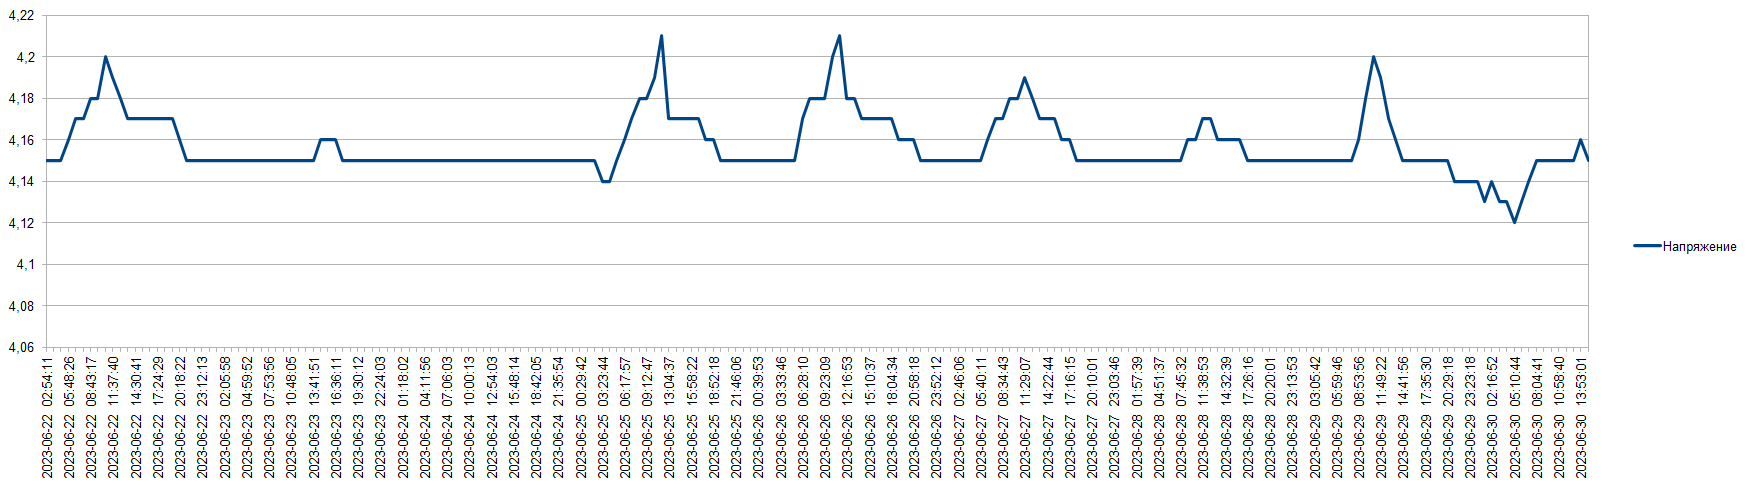 Voltage level plot for the period of 3 months.